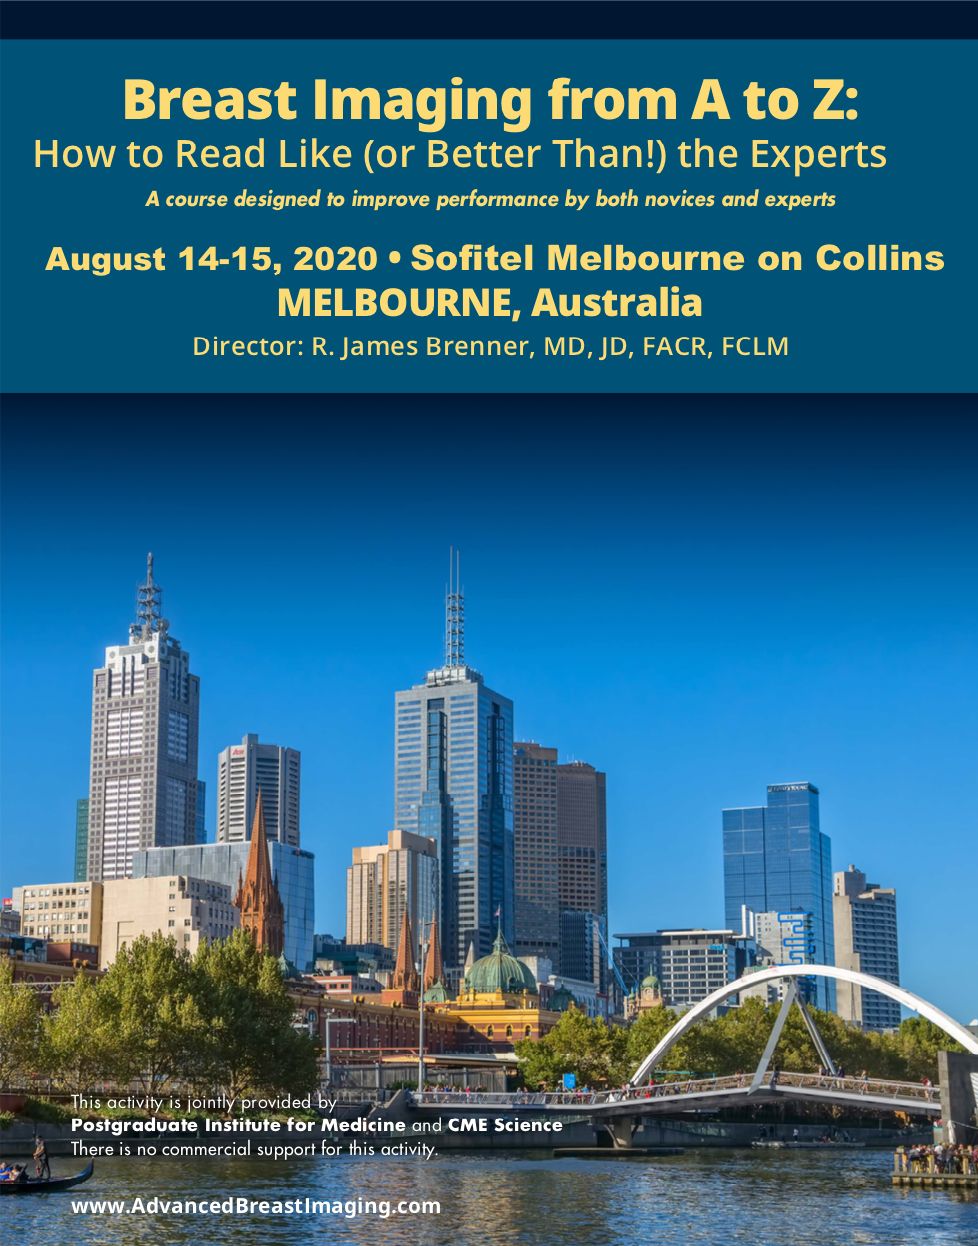 Breast Imaging from A to Z: How to Read Like (or Better Than!) the Experts, Melbourne, Victoria, Australia